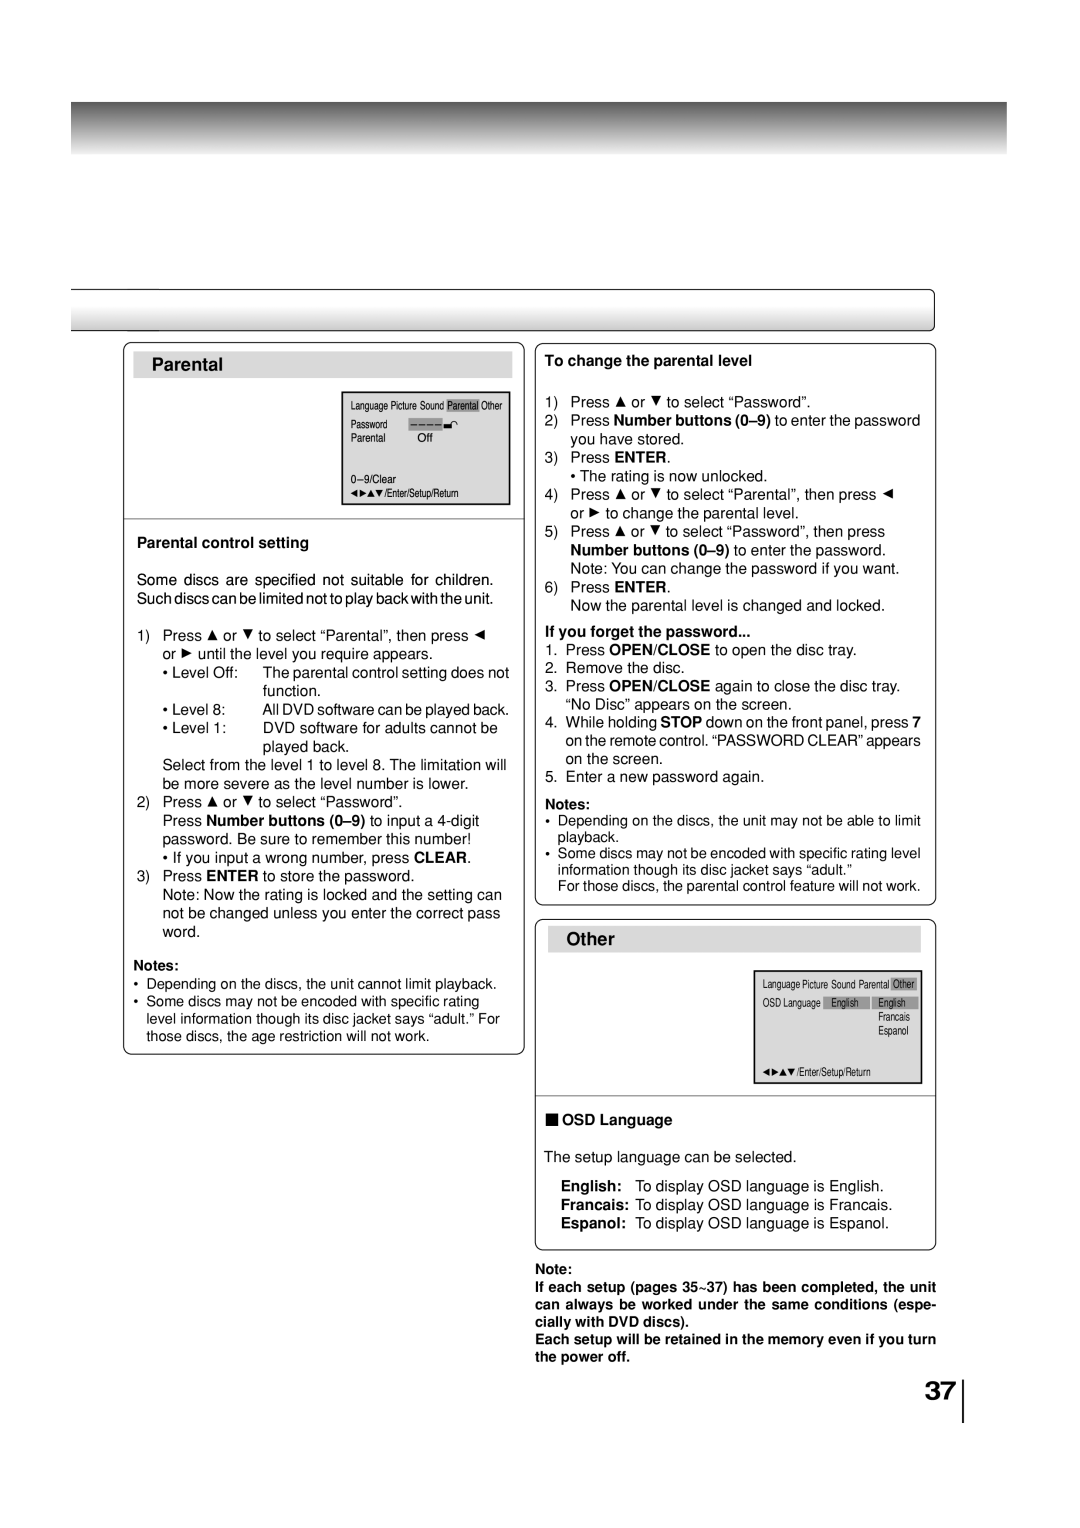 Toshiba SD-3860SC manual Other, Parental control setting, To change the parental level, If you forget the password 